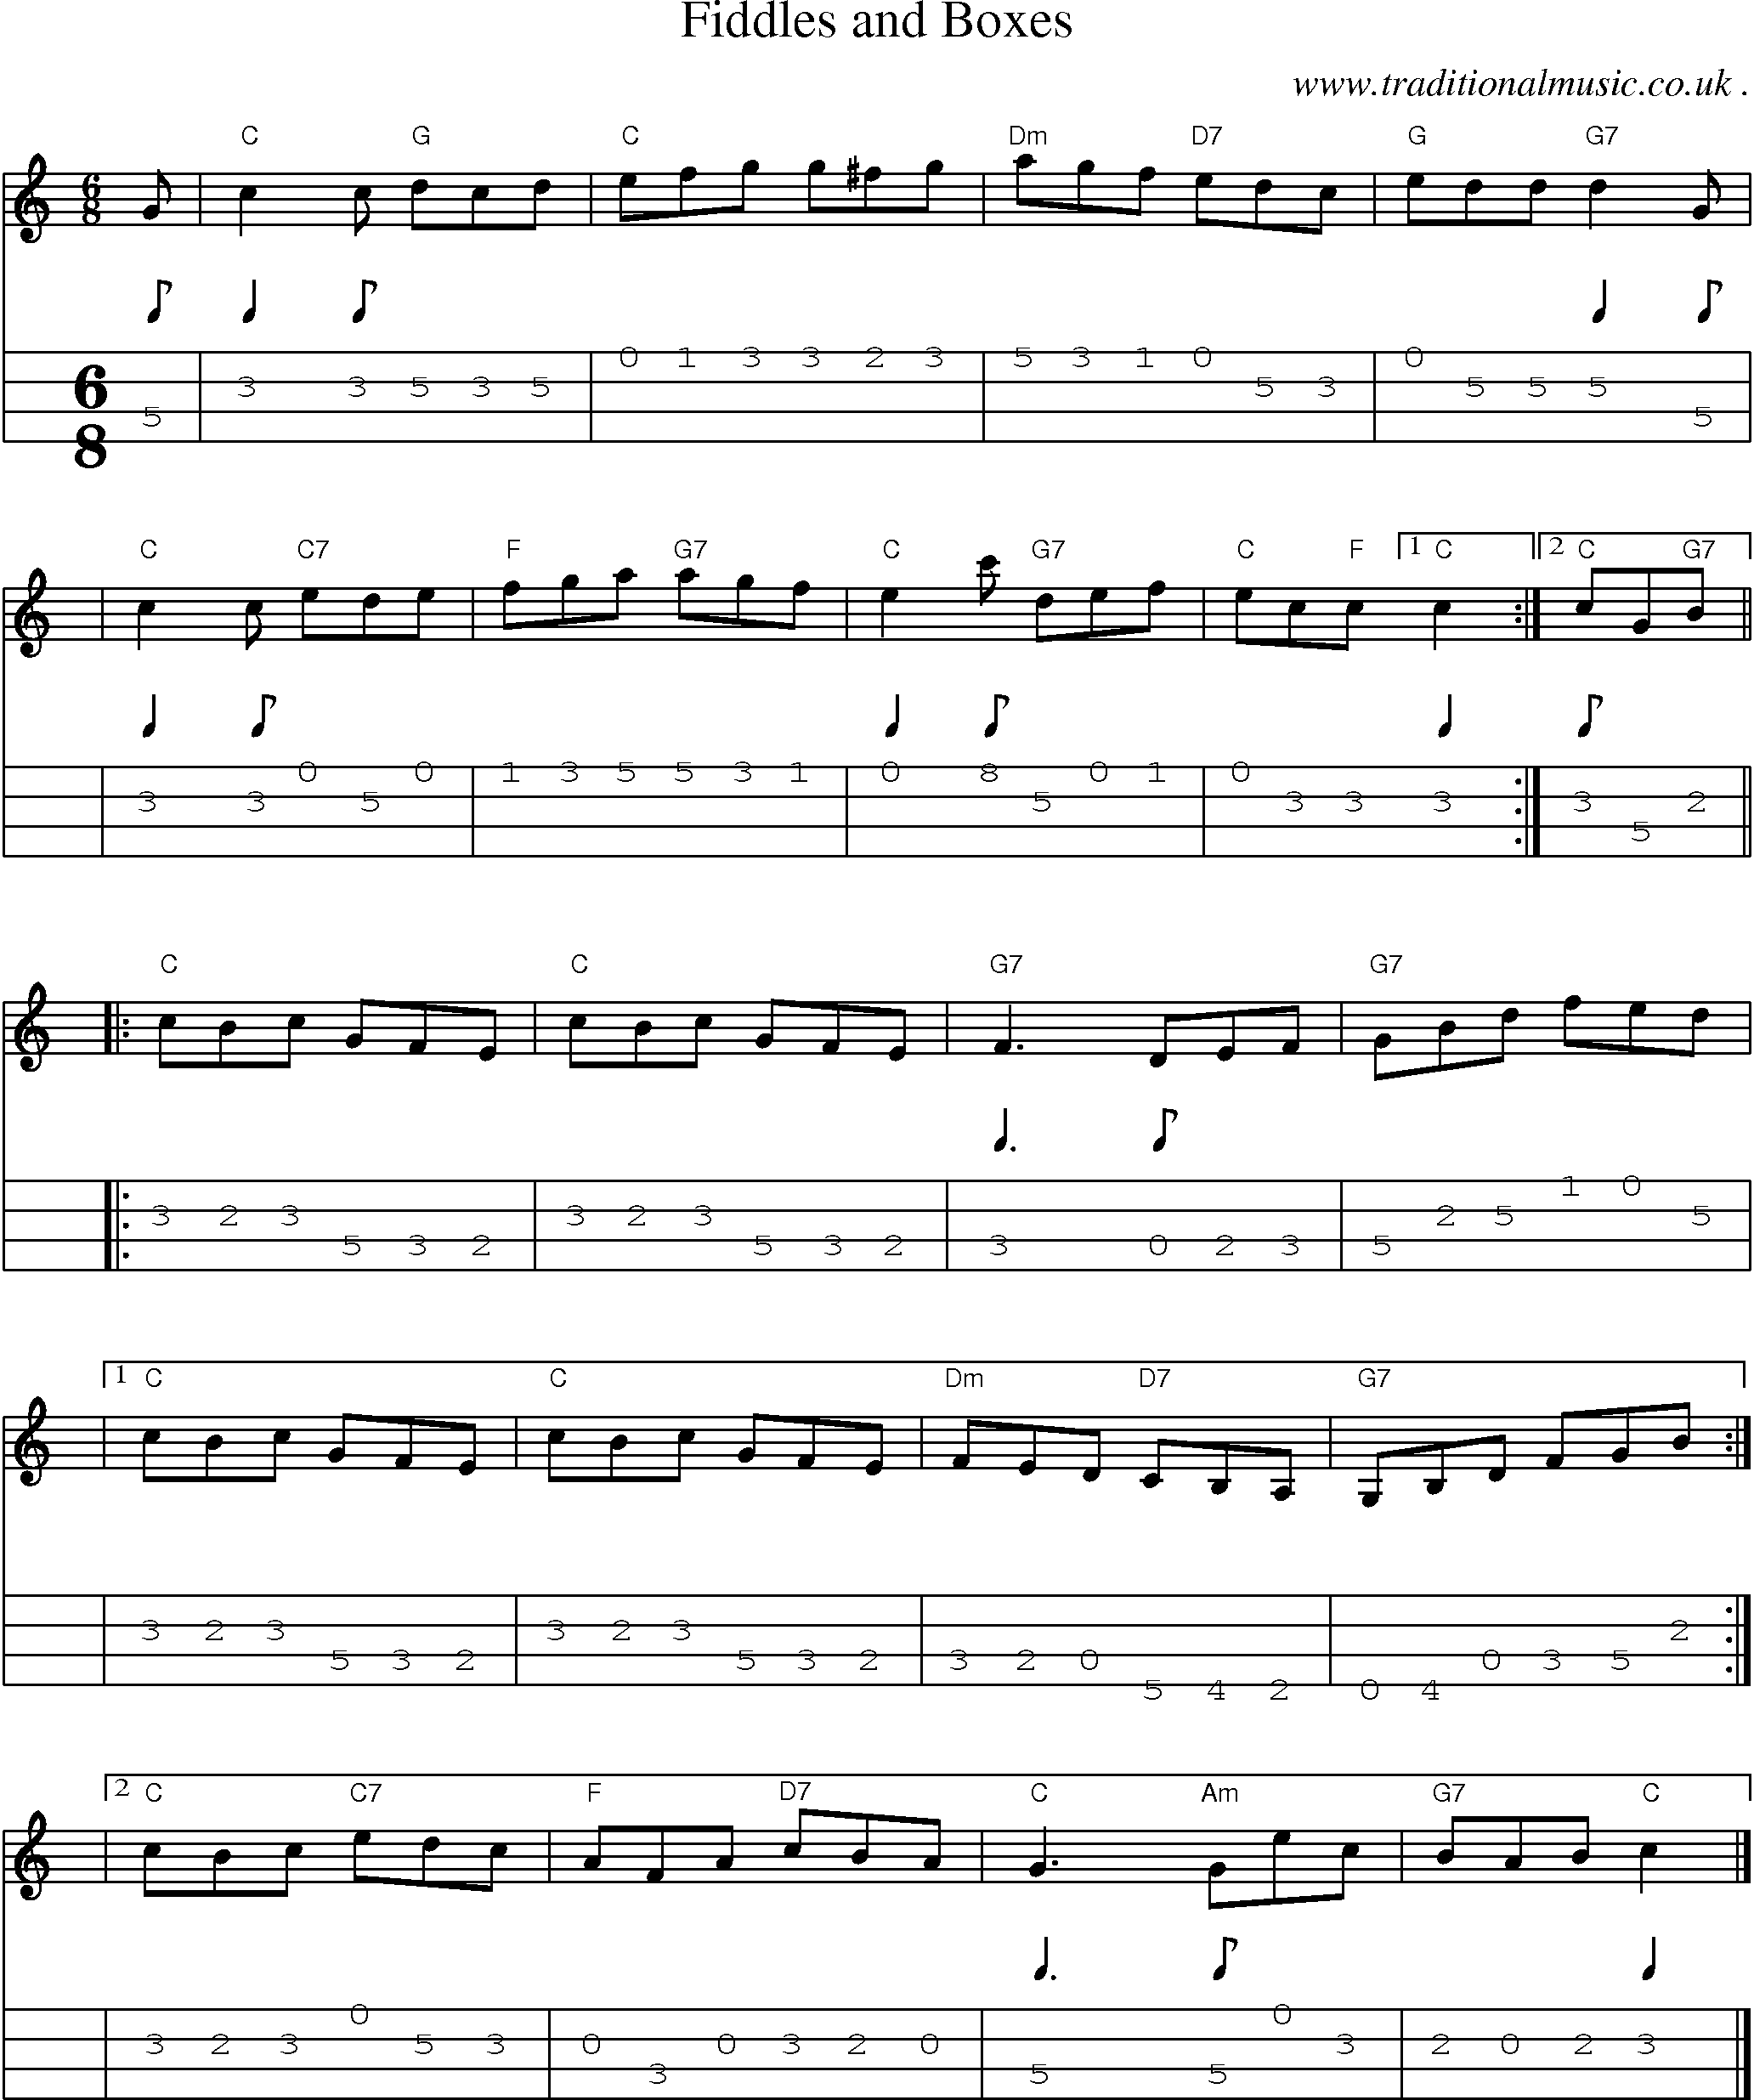 Sheet-music  score, Chords and Mandolin Tabs for Fiddles And Boxes